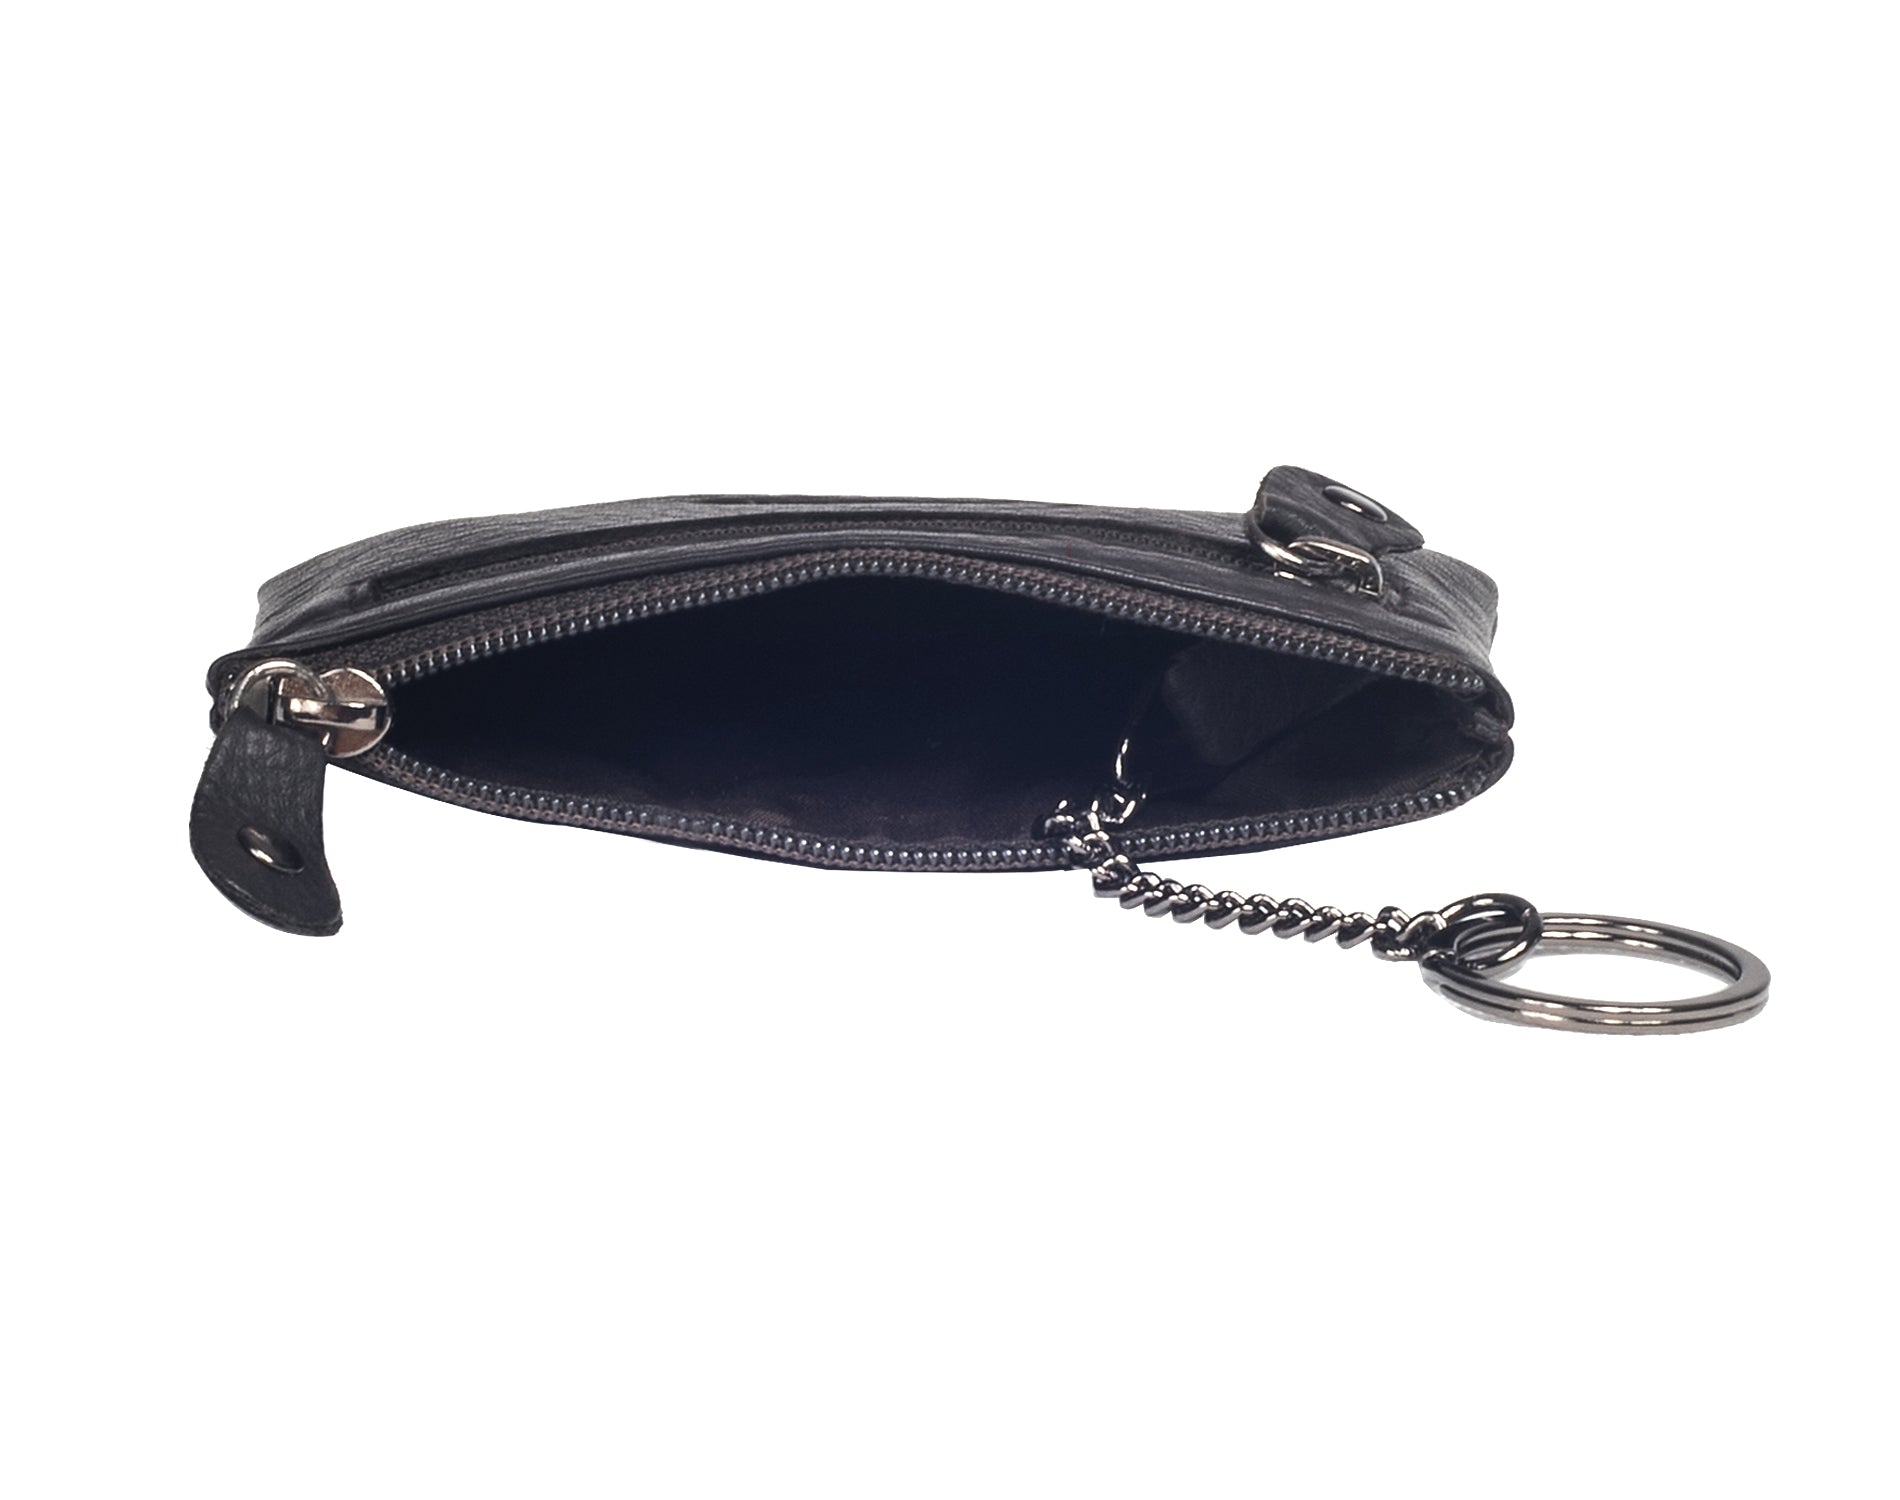 Get Small Leather Coin Purse Online India at Nutcaseshop.com